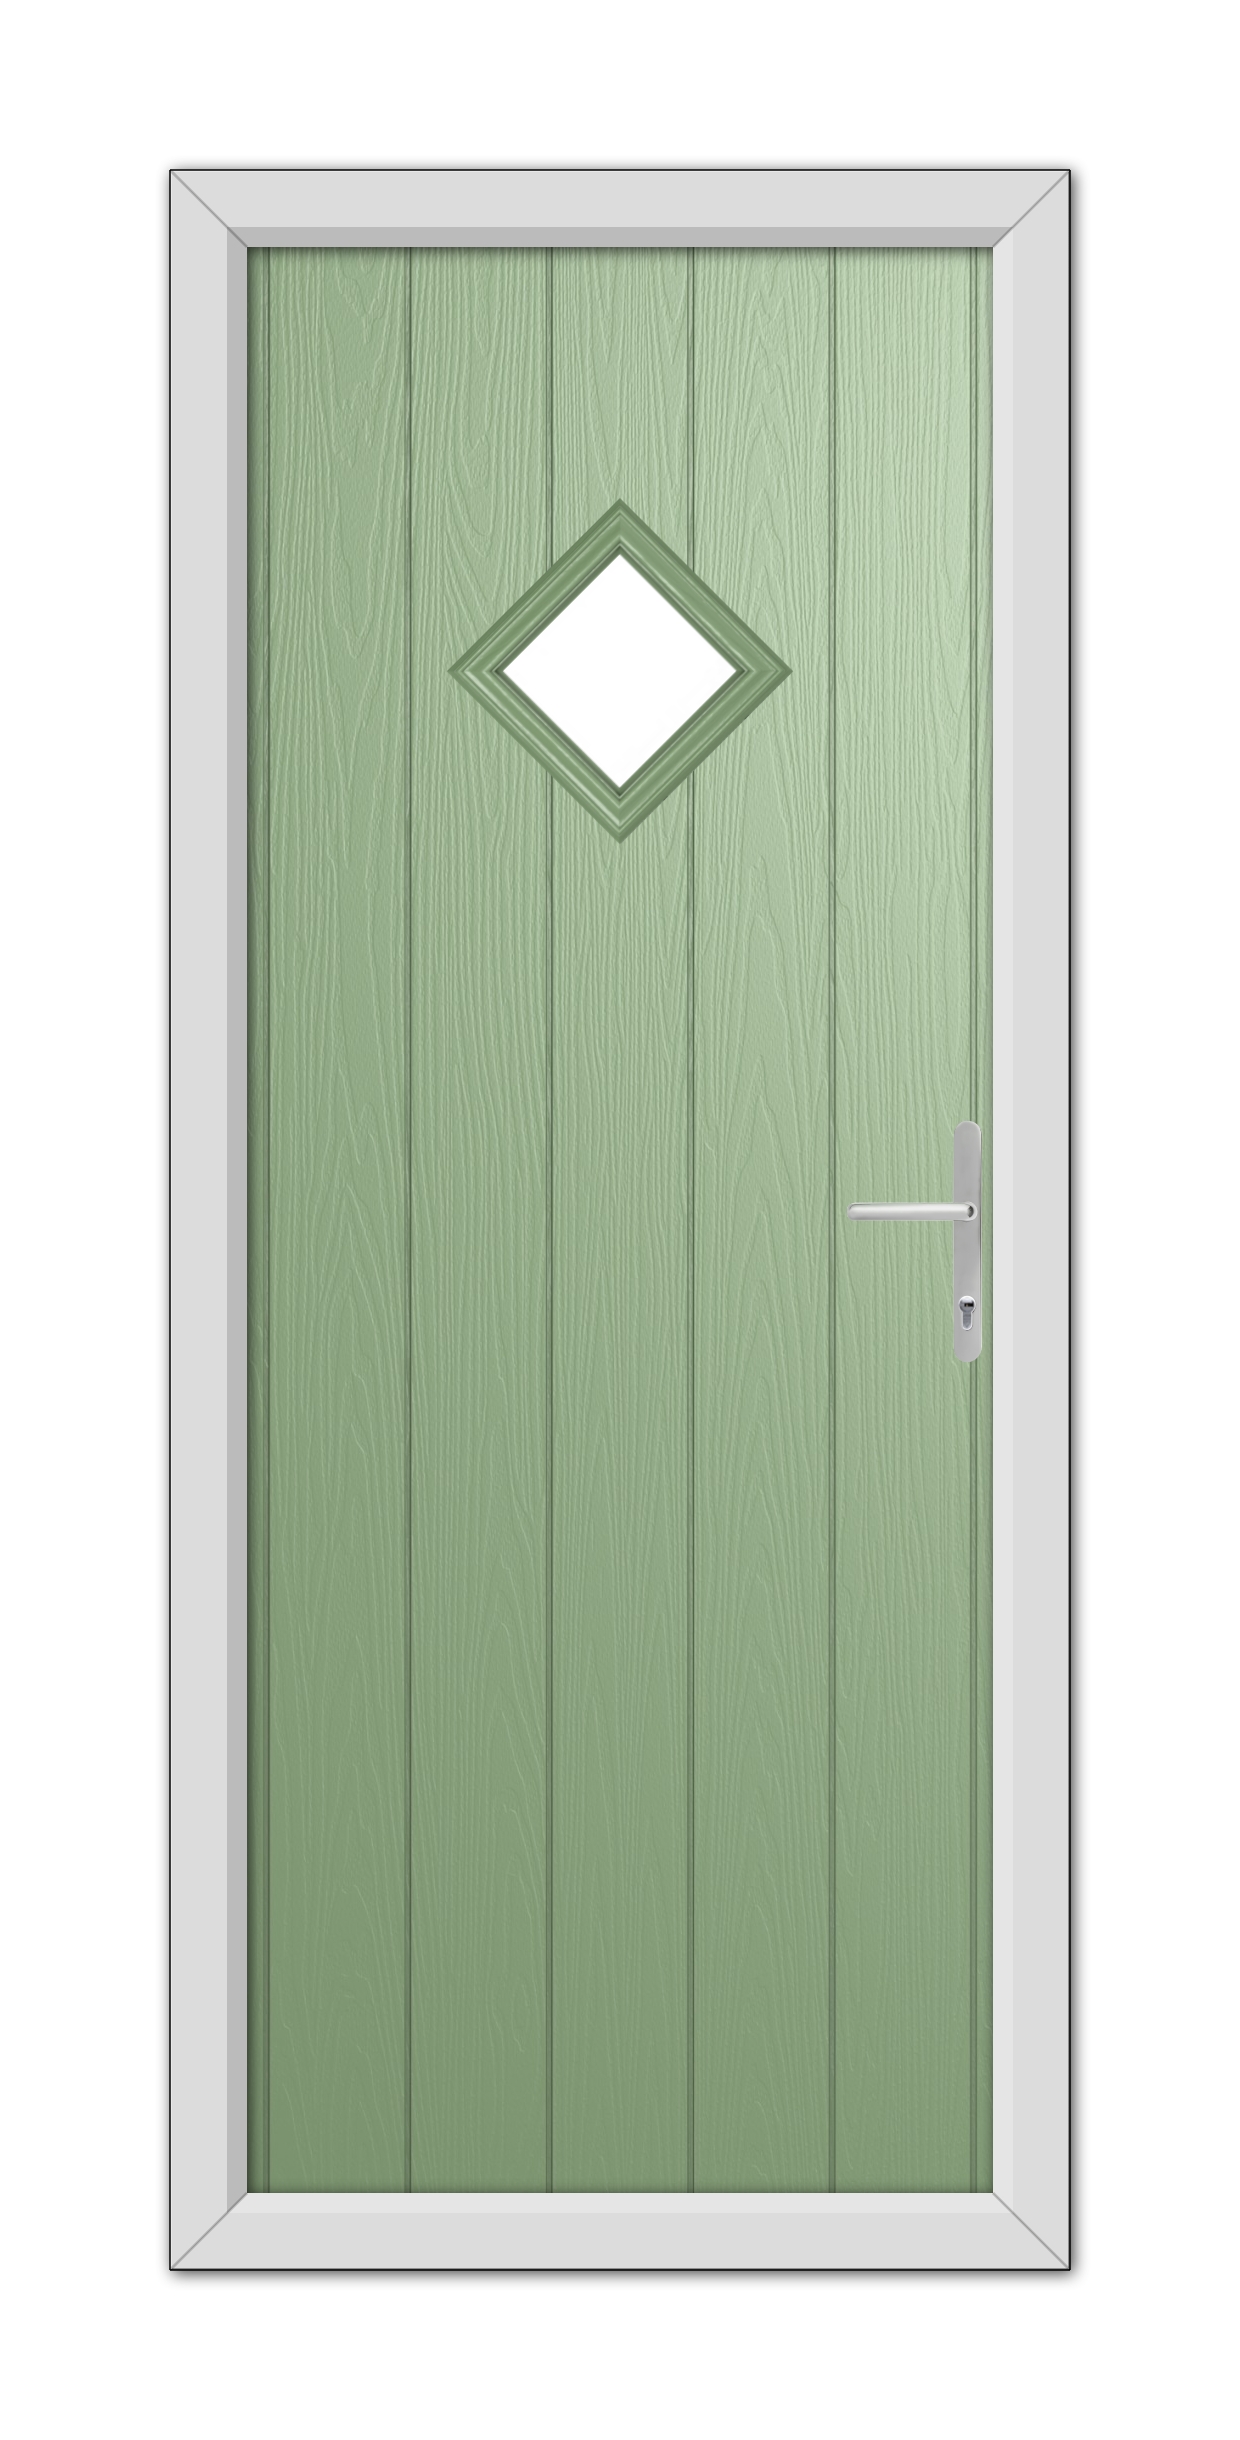 A Chartwell Green Cornwall Composite Door 48mm Timber Core with a diamond-shaped window and white modern handle, set in a white frame.